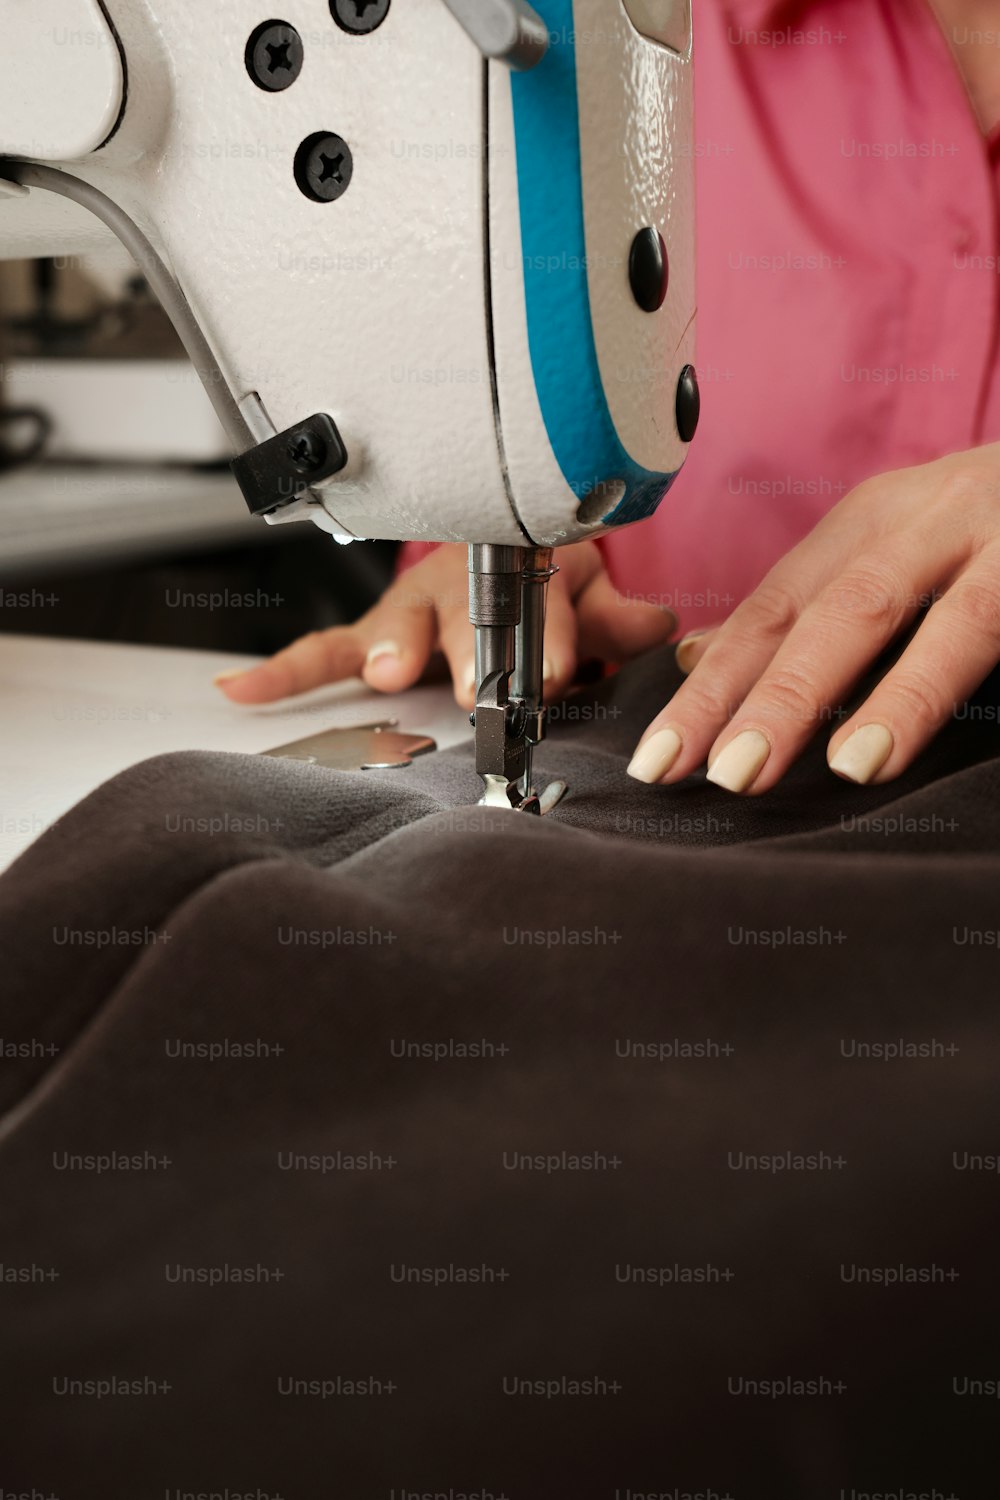 a woman using a sewing machine on a piece of fabric